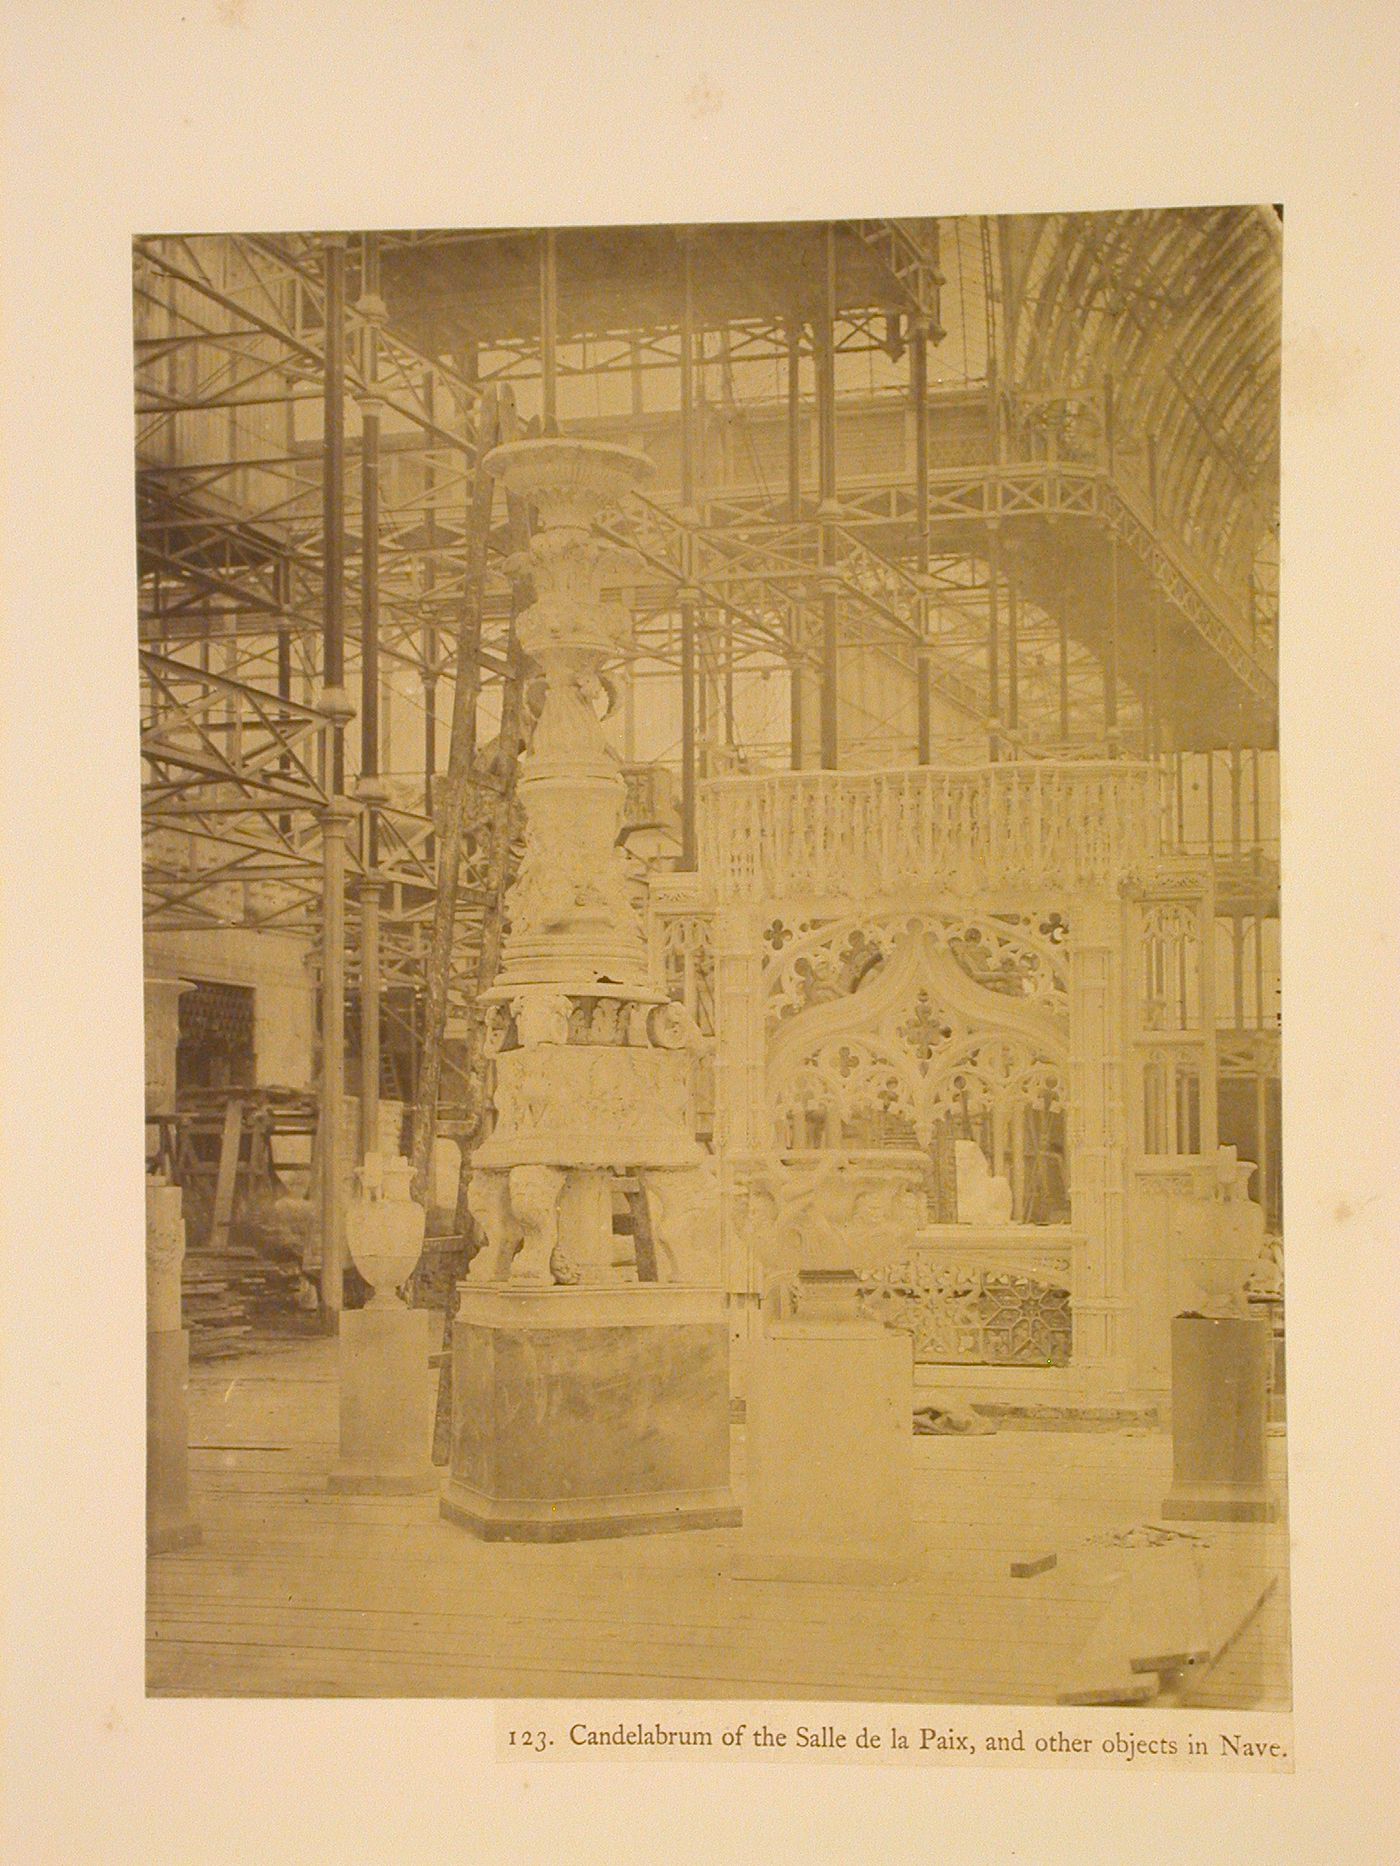 Candelabrum of the Salle de la Paix, and other objects in the Nave, Crystal Palace, Sydenham, England